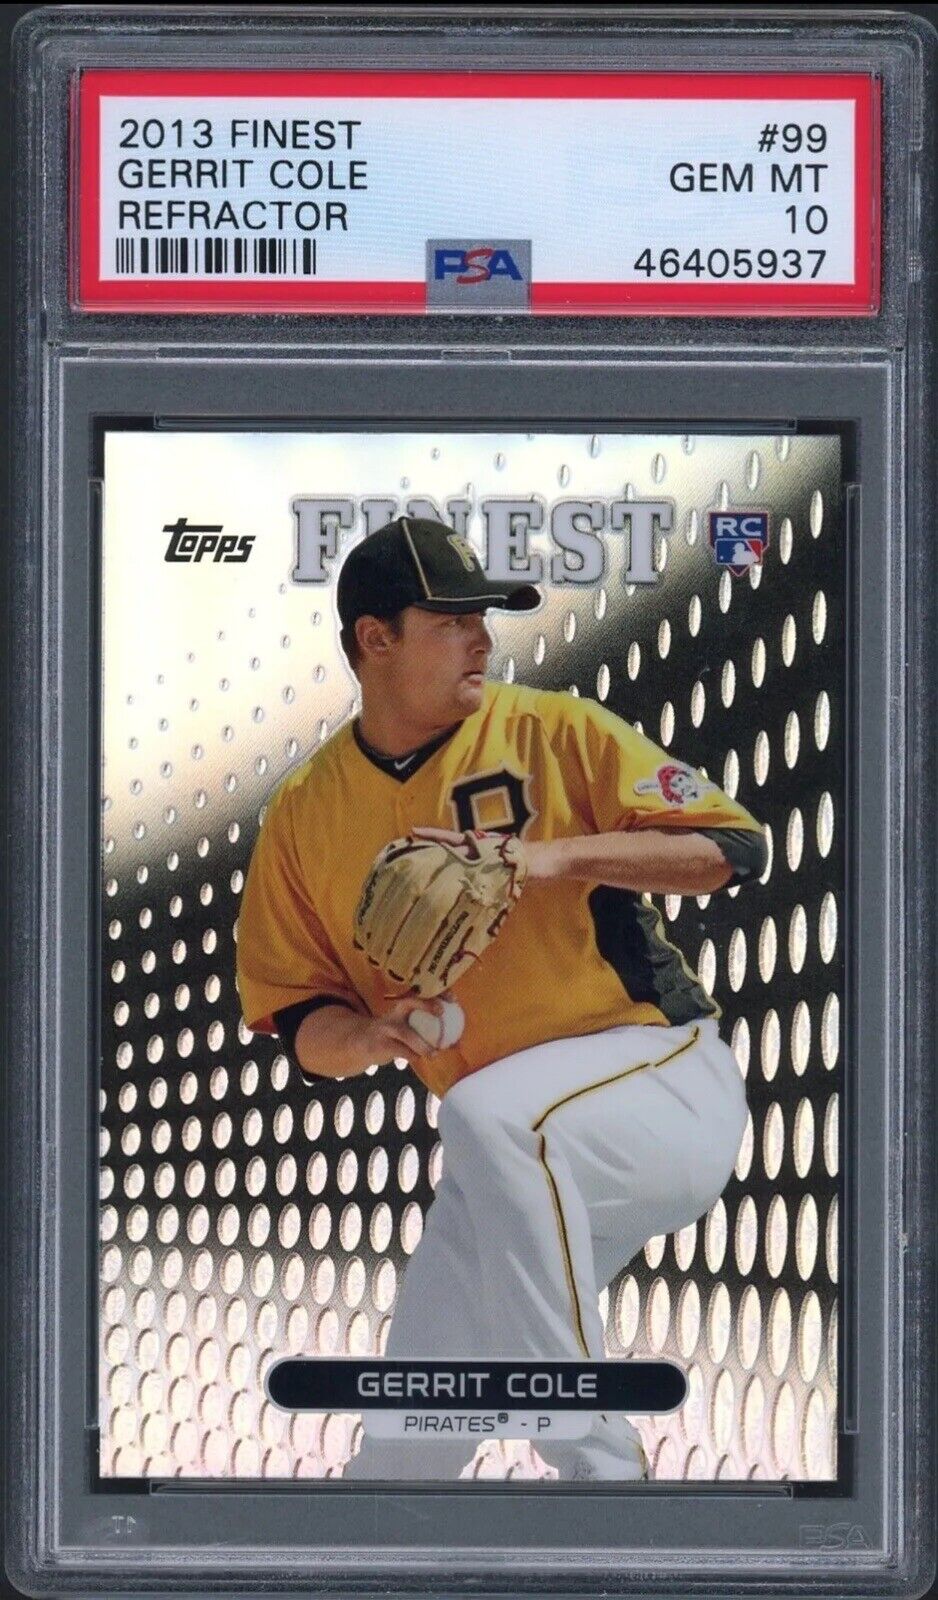 2013 Topps Finest Gerrit Cole Refractor Rookie RC #99 PSA 10